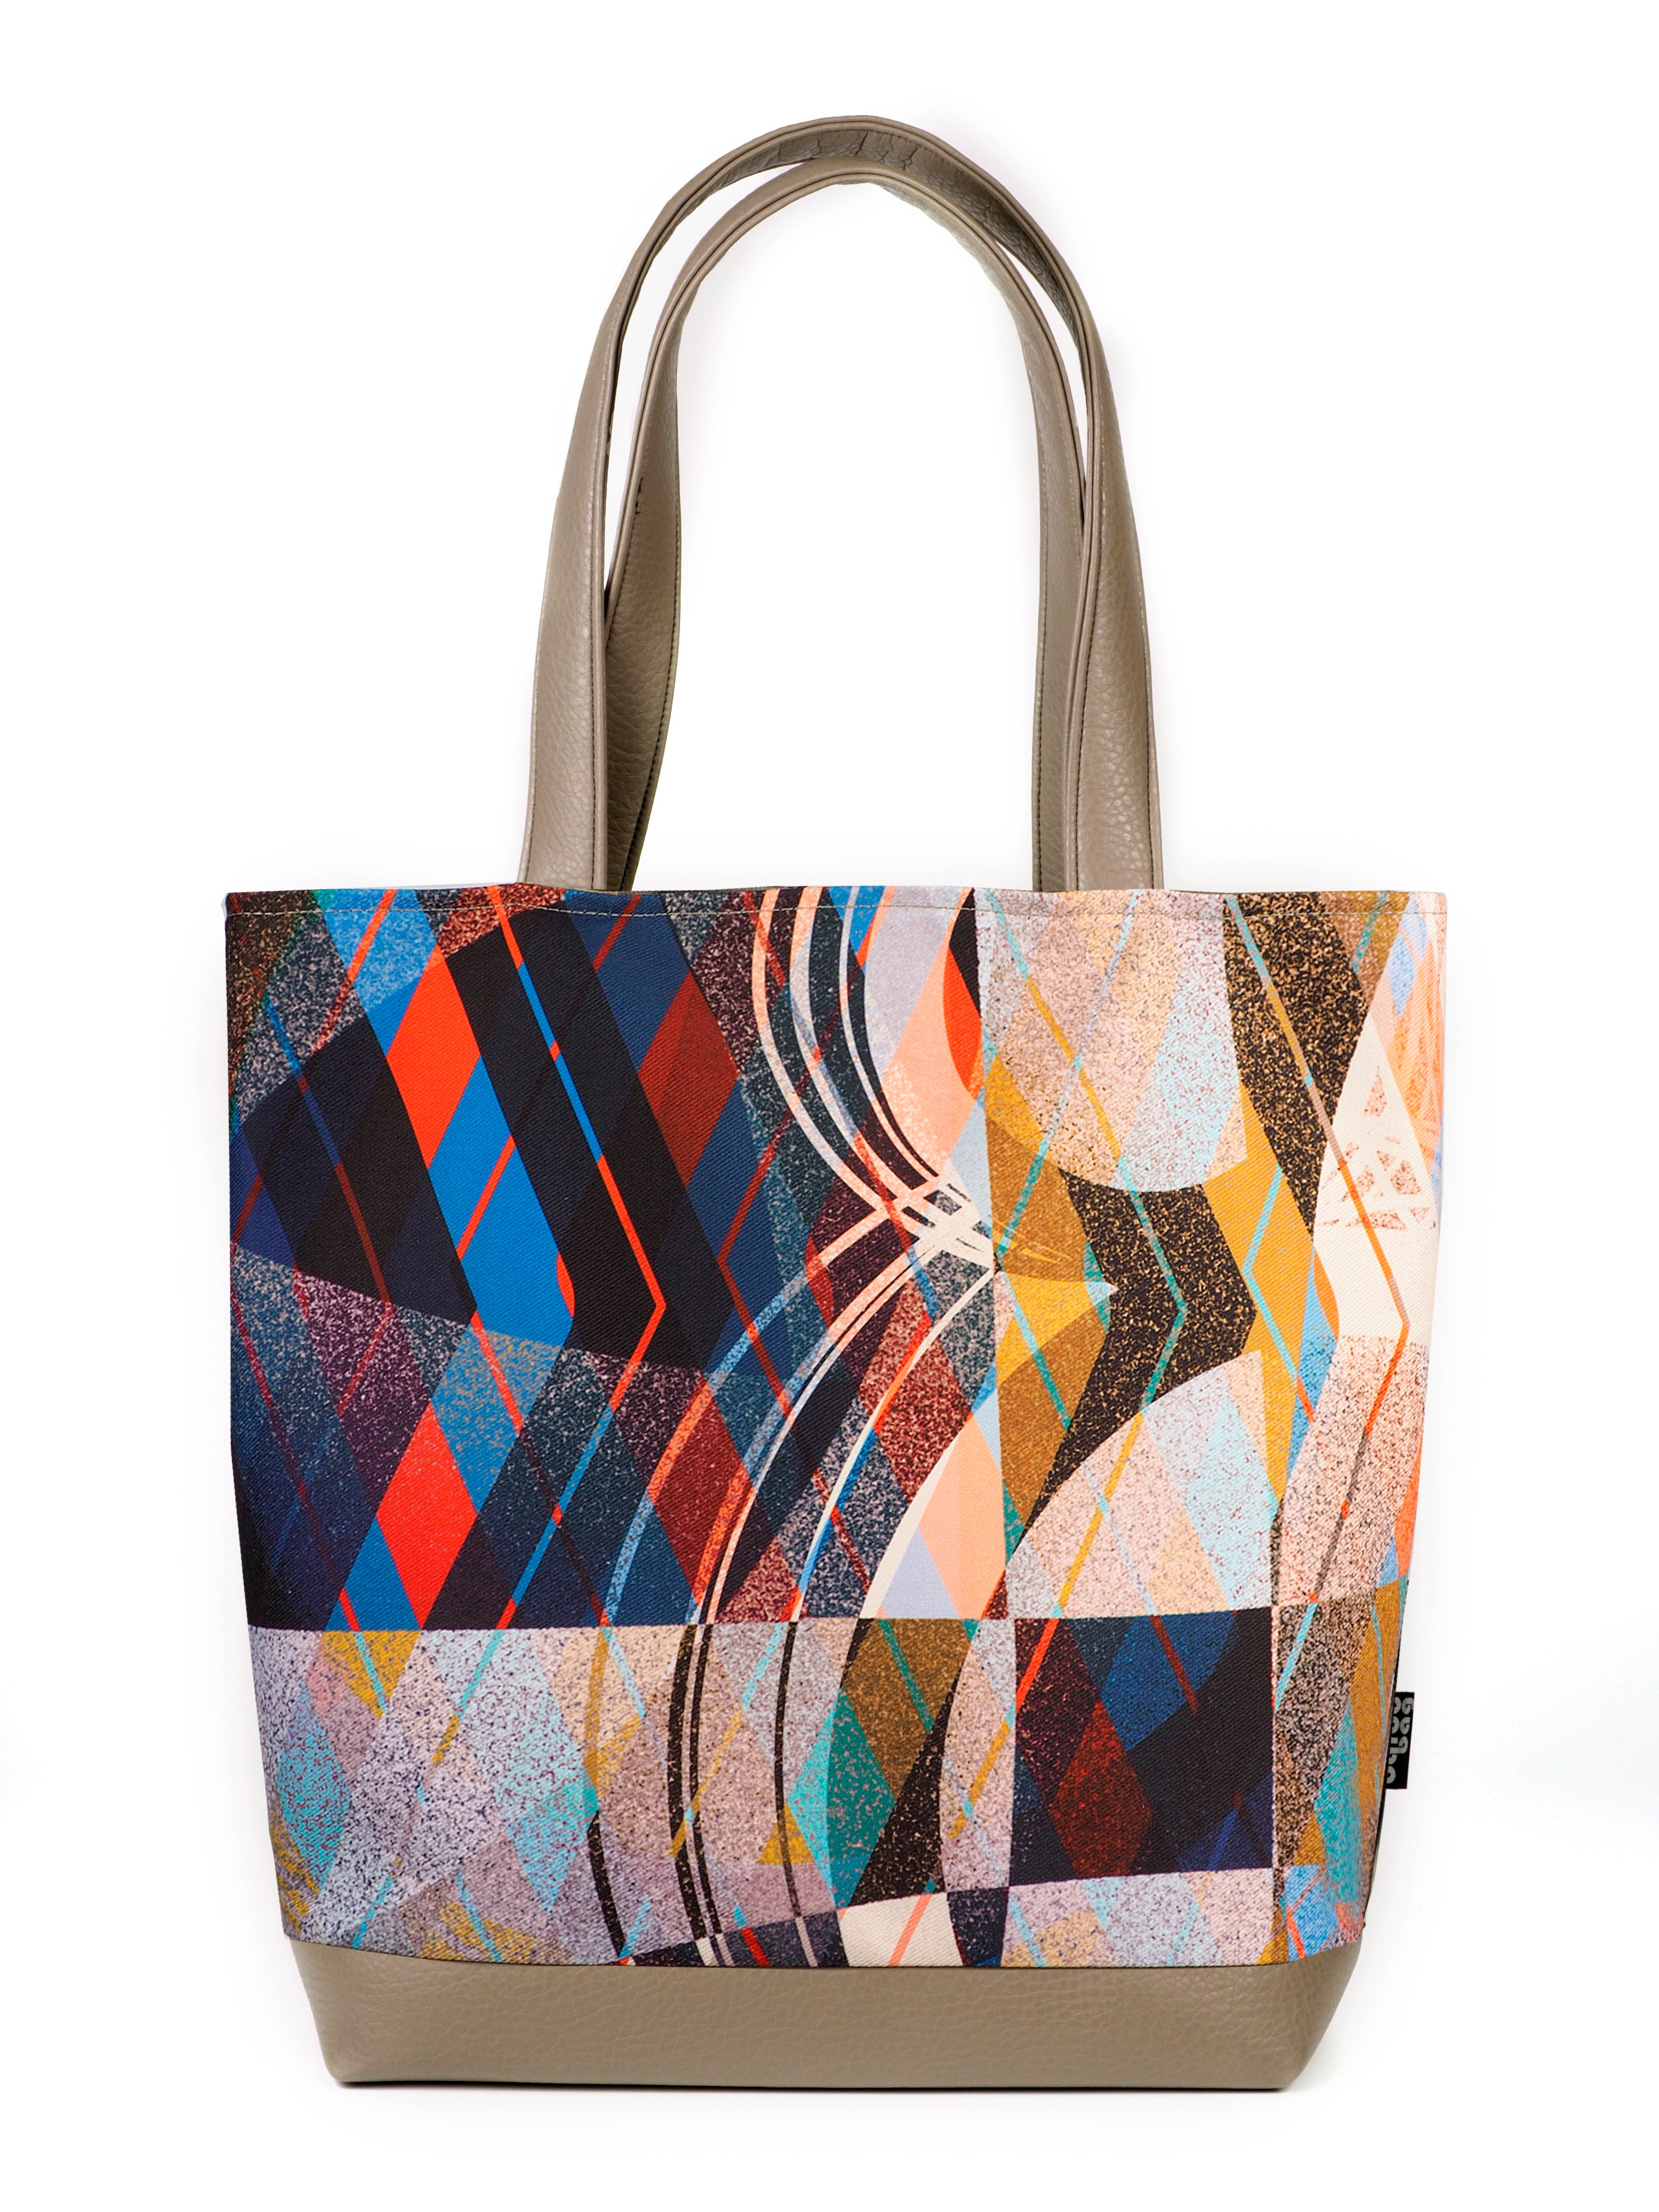 Bardo large tote bag - On the beach - Premium large tote bag from Bardo bag - Just lvabstract, art bag, black, gift, green, handemade, large, pink, red, tablet, tote bag, vegan leather, woman, work bag89.00! Shop now at BARDO ART WORKS